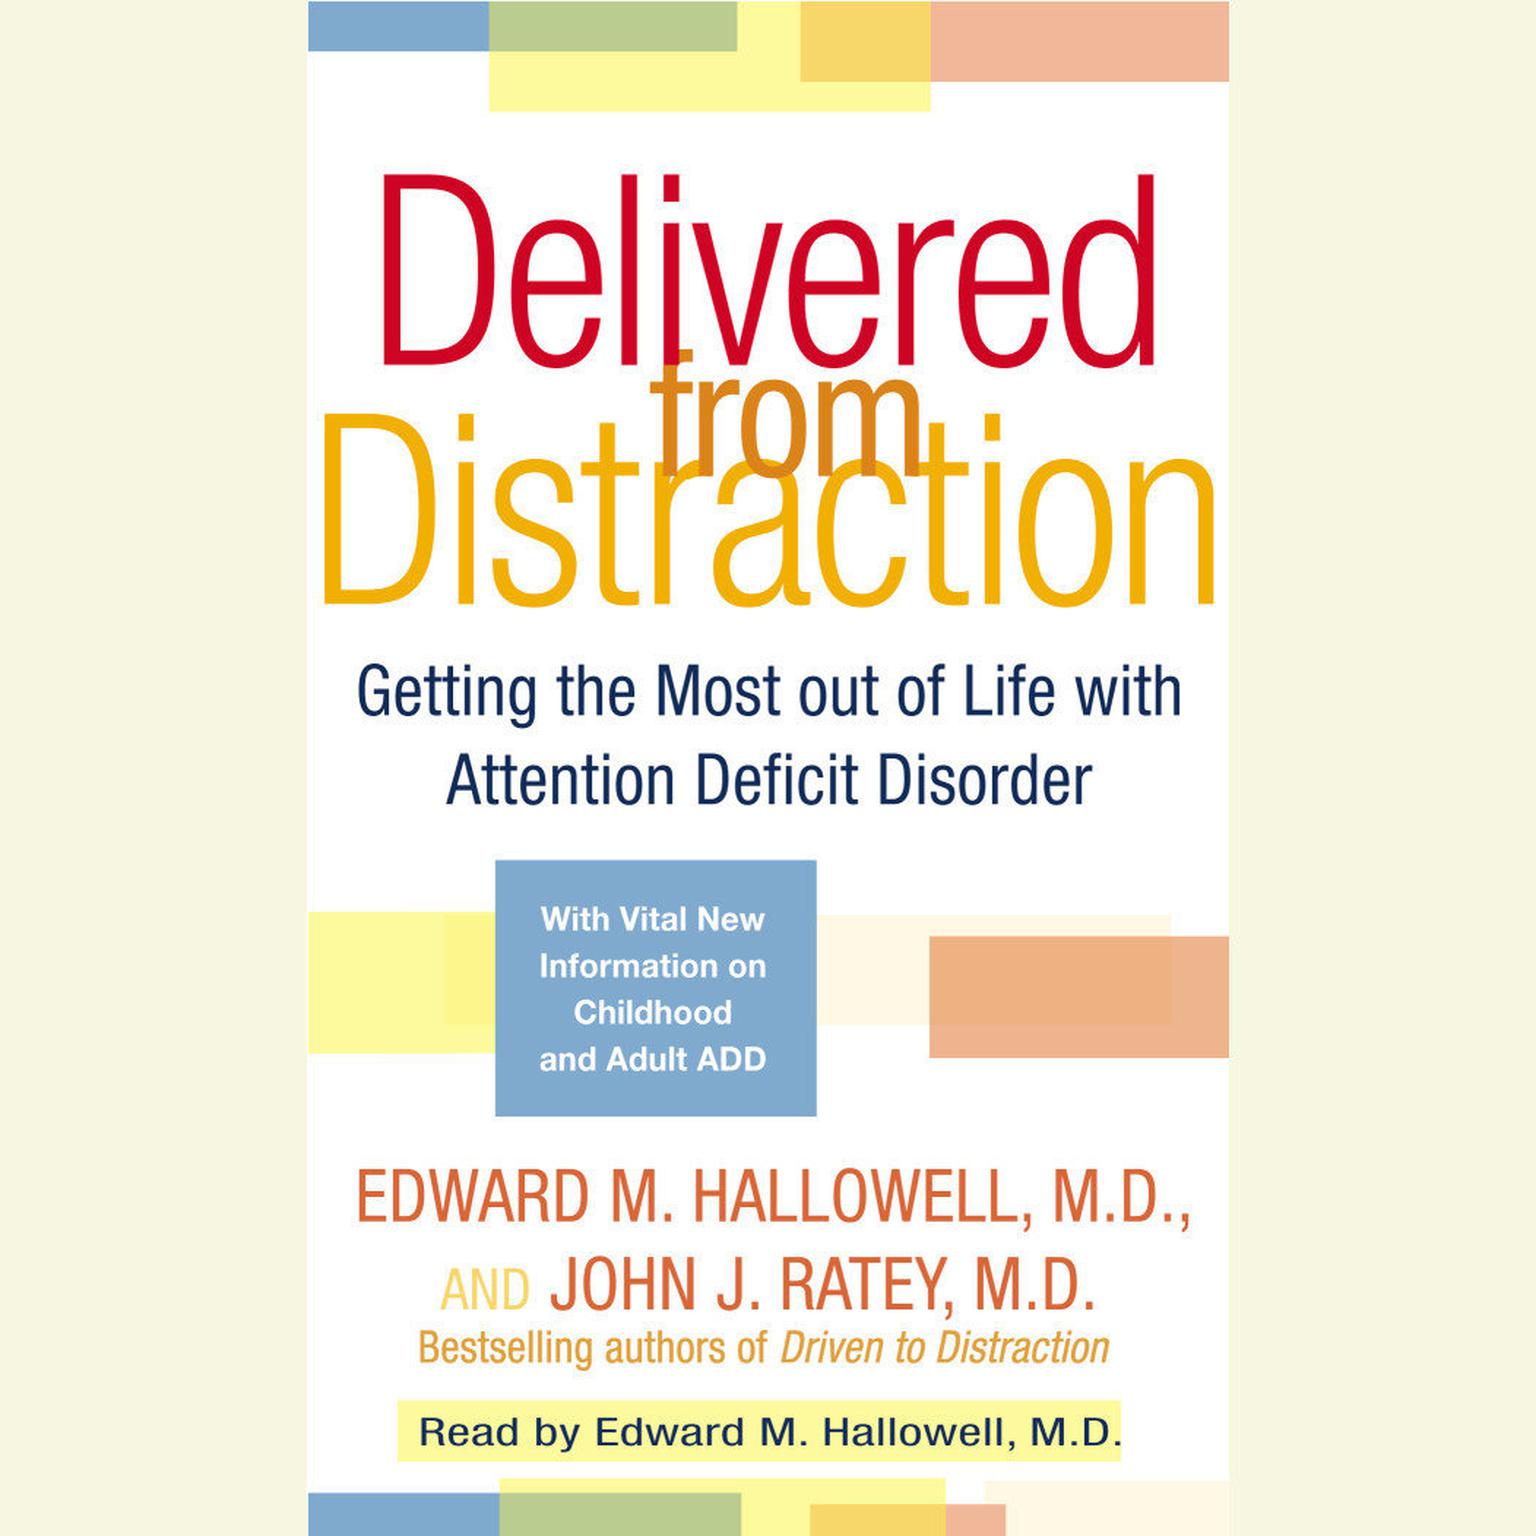 Delivered from Distraction (Abridged): Getting the Most out of Life with Attention Deficit Disorder Audiobook, by Edward M. Hallowell